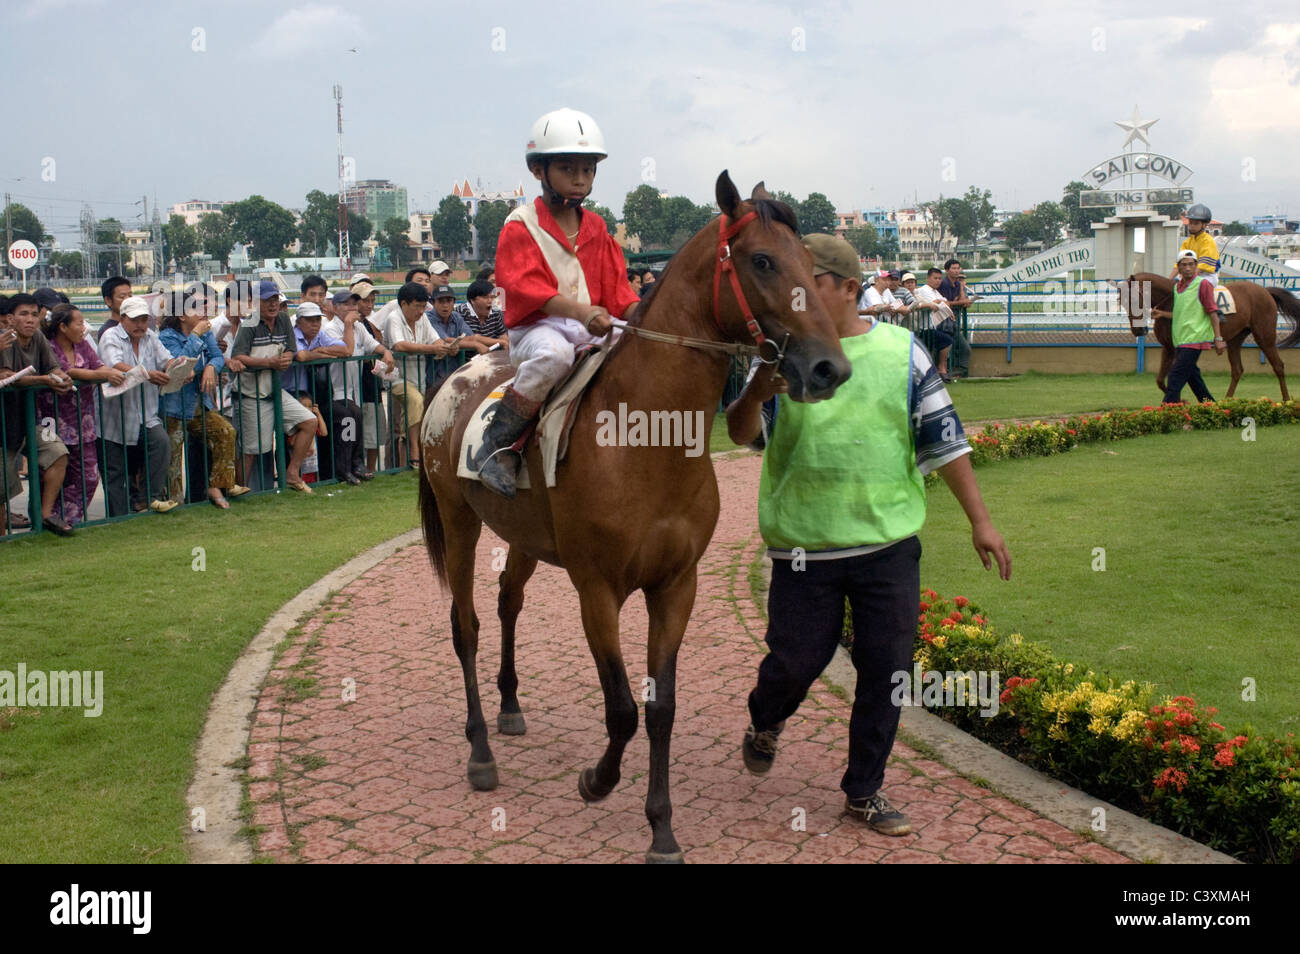 A child jockey on horse is paraded around before the race at the Saigon Racing Club. Stock Photo